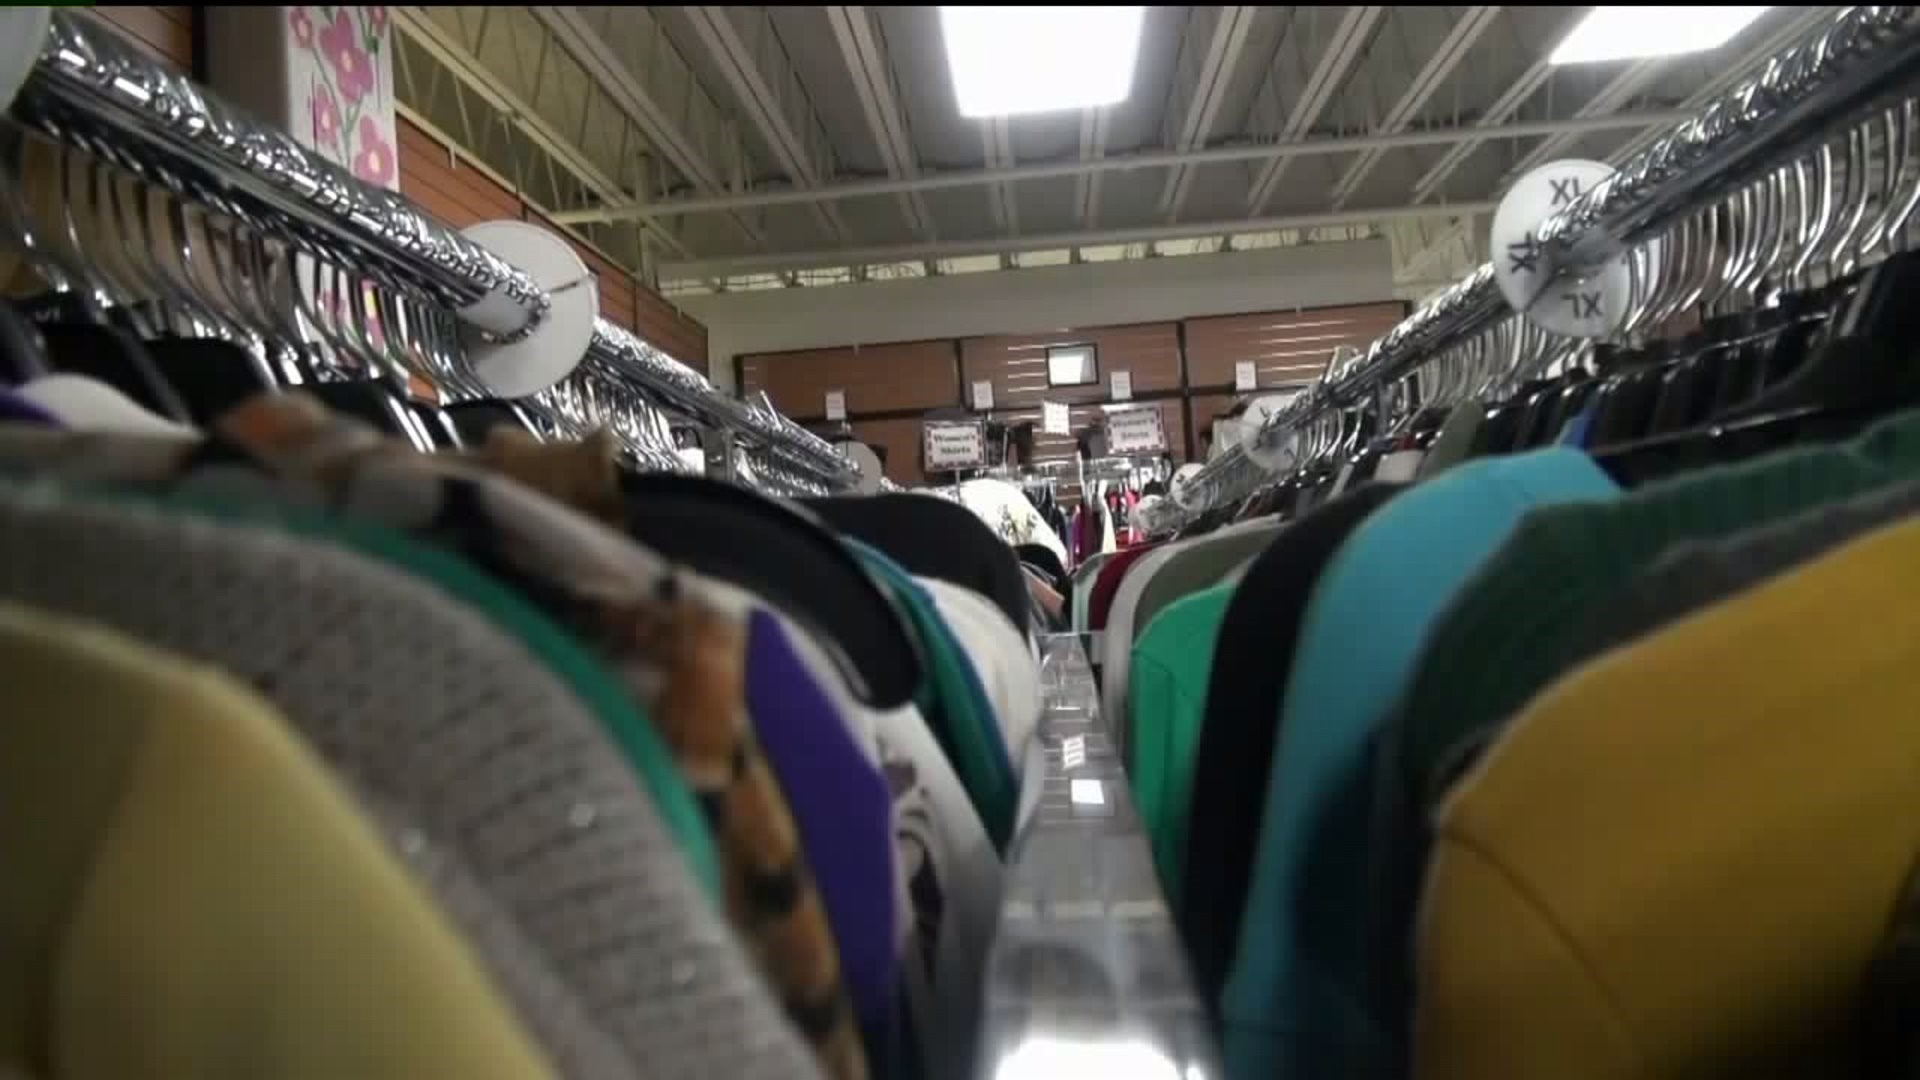 Thrift Store Run by Students with Disabilities